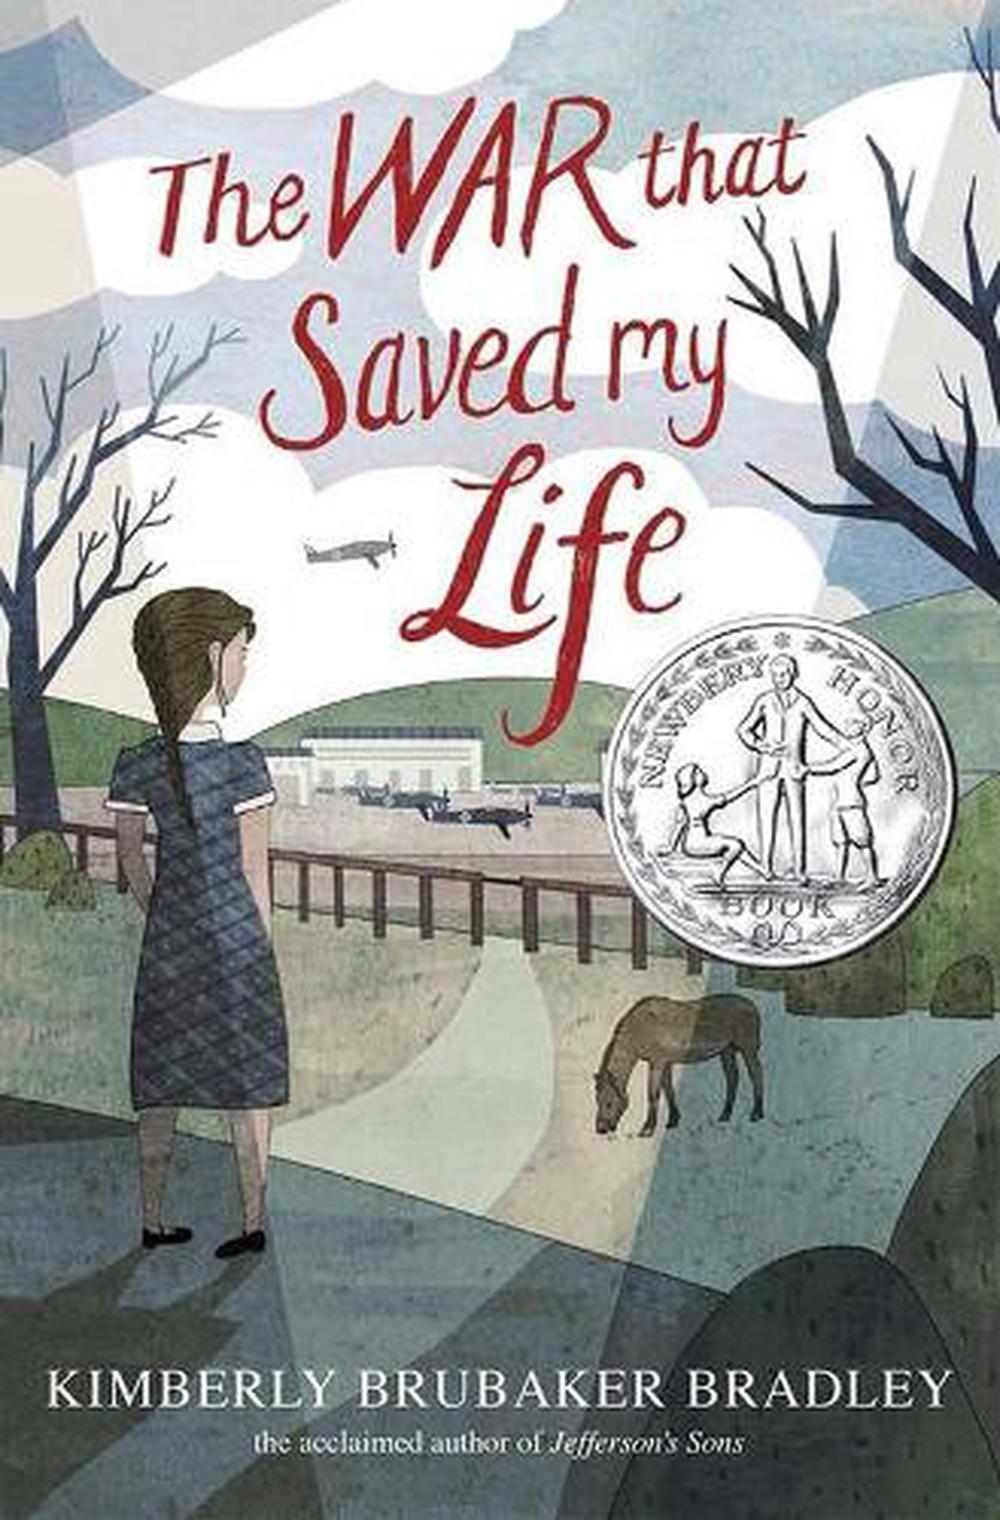 the war that saved my life by kimberly brubaker bradley